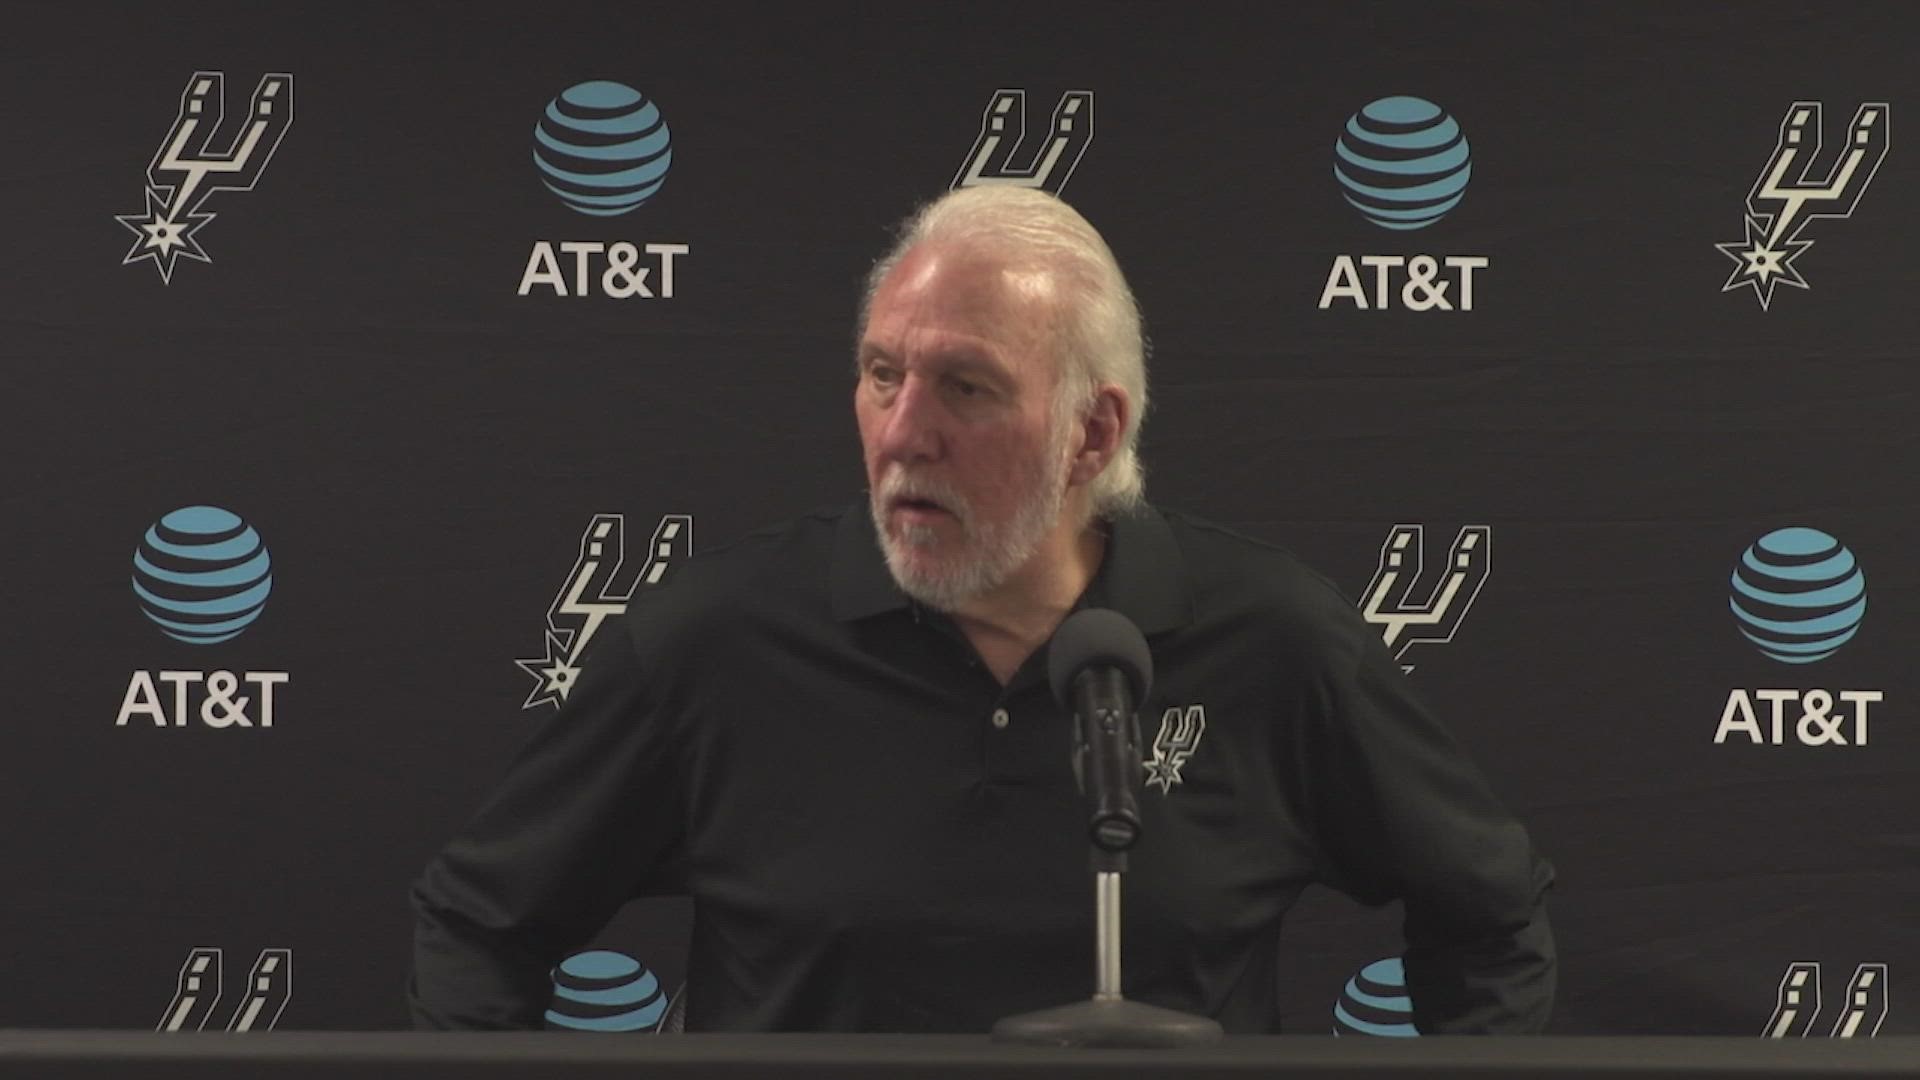 "He's got a lot of talent. He's done a good job. At this point, the sky's the limit for him if he just sticks with it," Pop said of the former Spur.